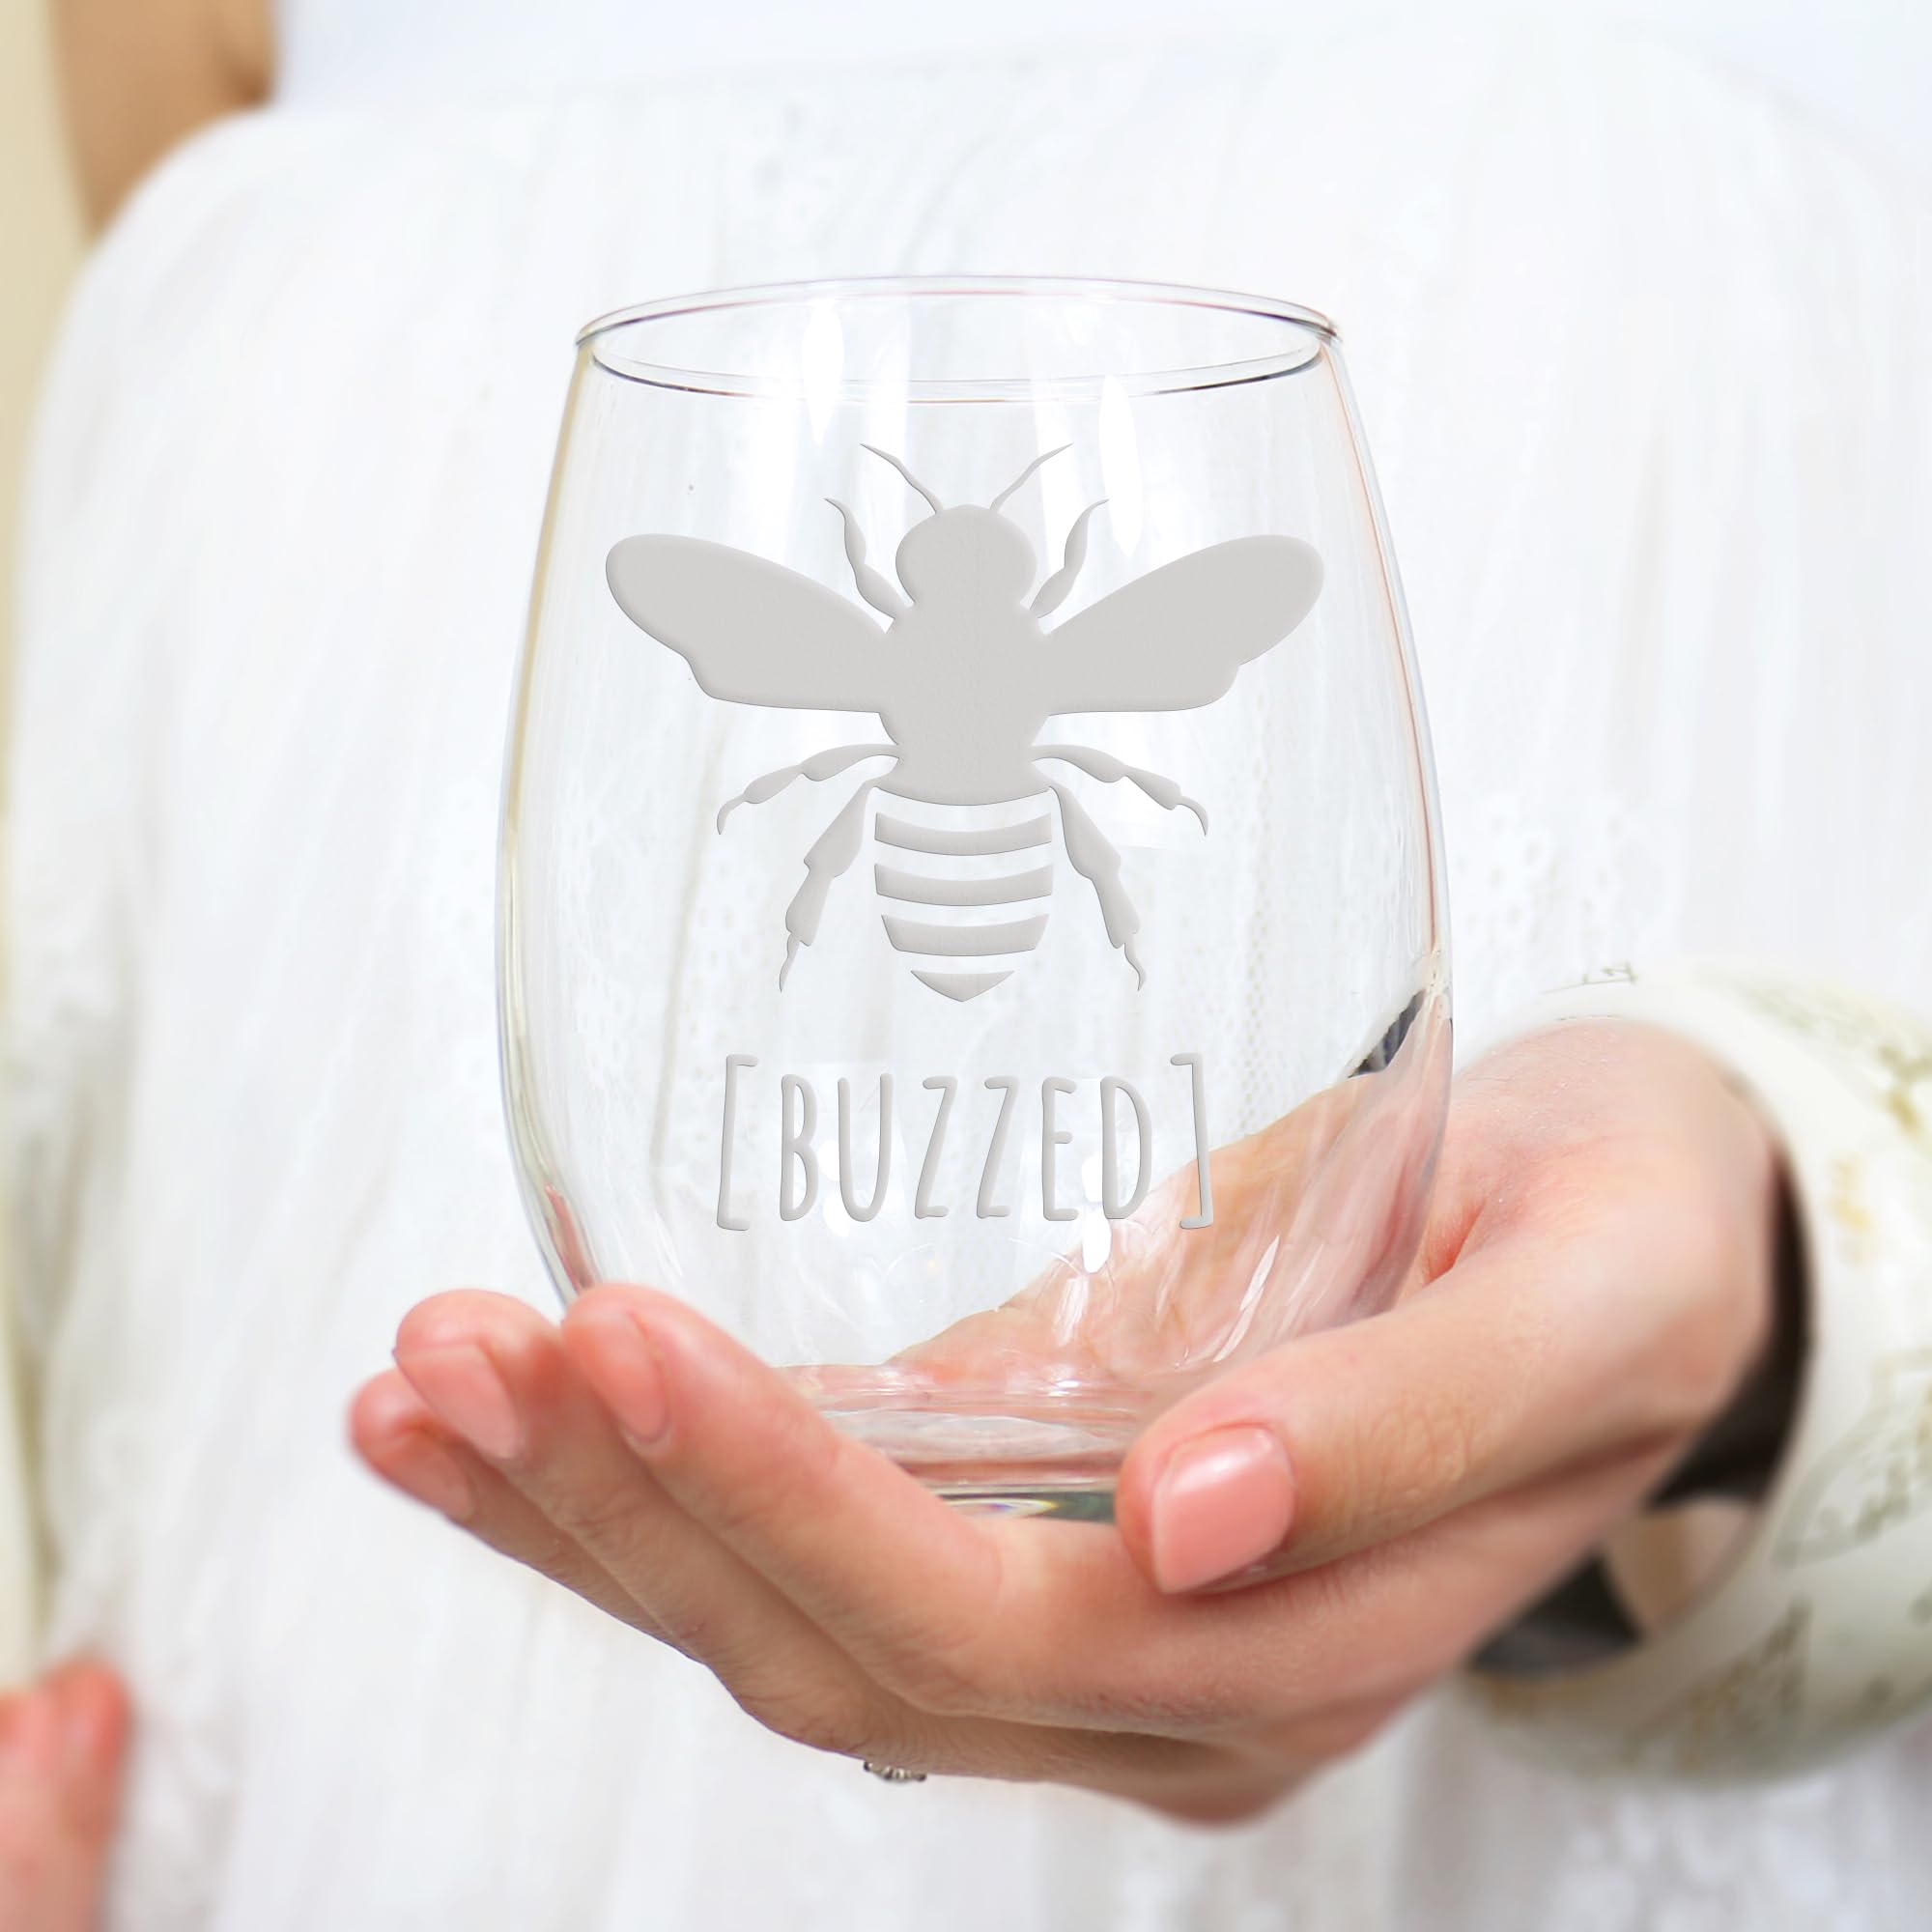 Bumble Bee Buzzed Stemless Wine Glass - Wine Glass, Gift, Funny, Cute, Buzzed, Bumble Bee, Bumblebee, Wine, Adorable